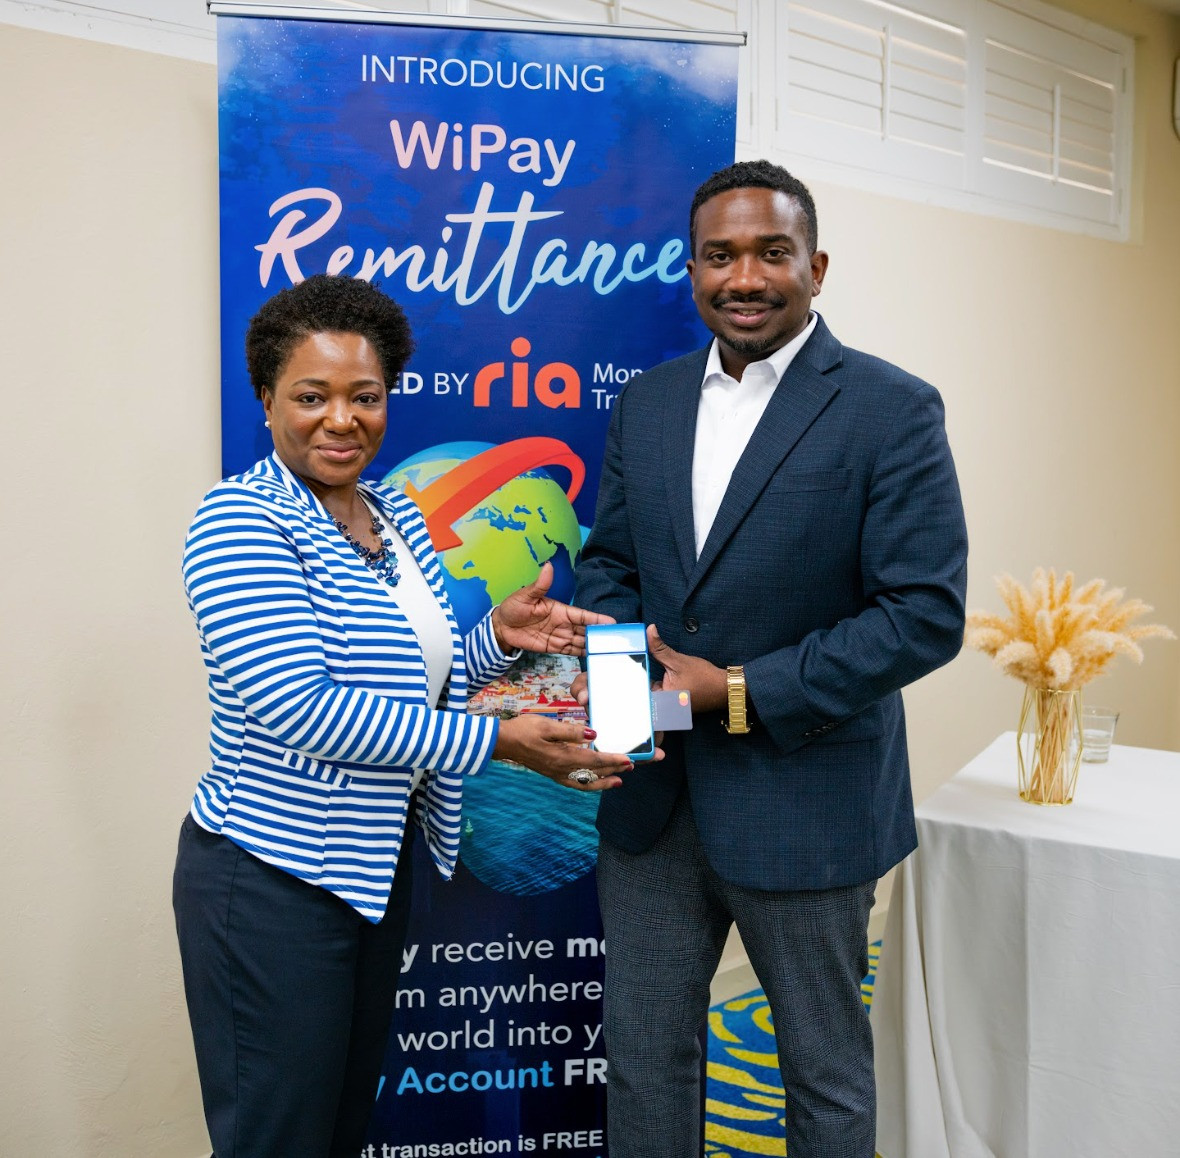 Caribbean News Global teleford_wayne WiPay launches WiPay Remittance in Grenada  